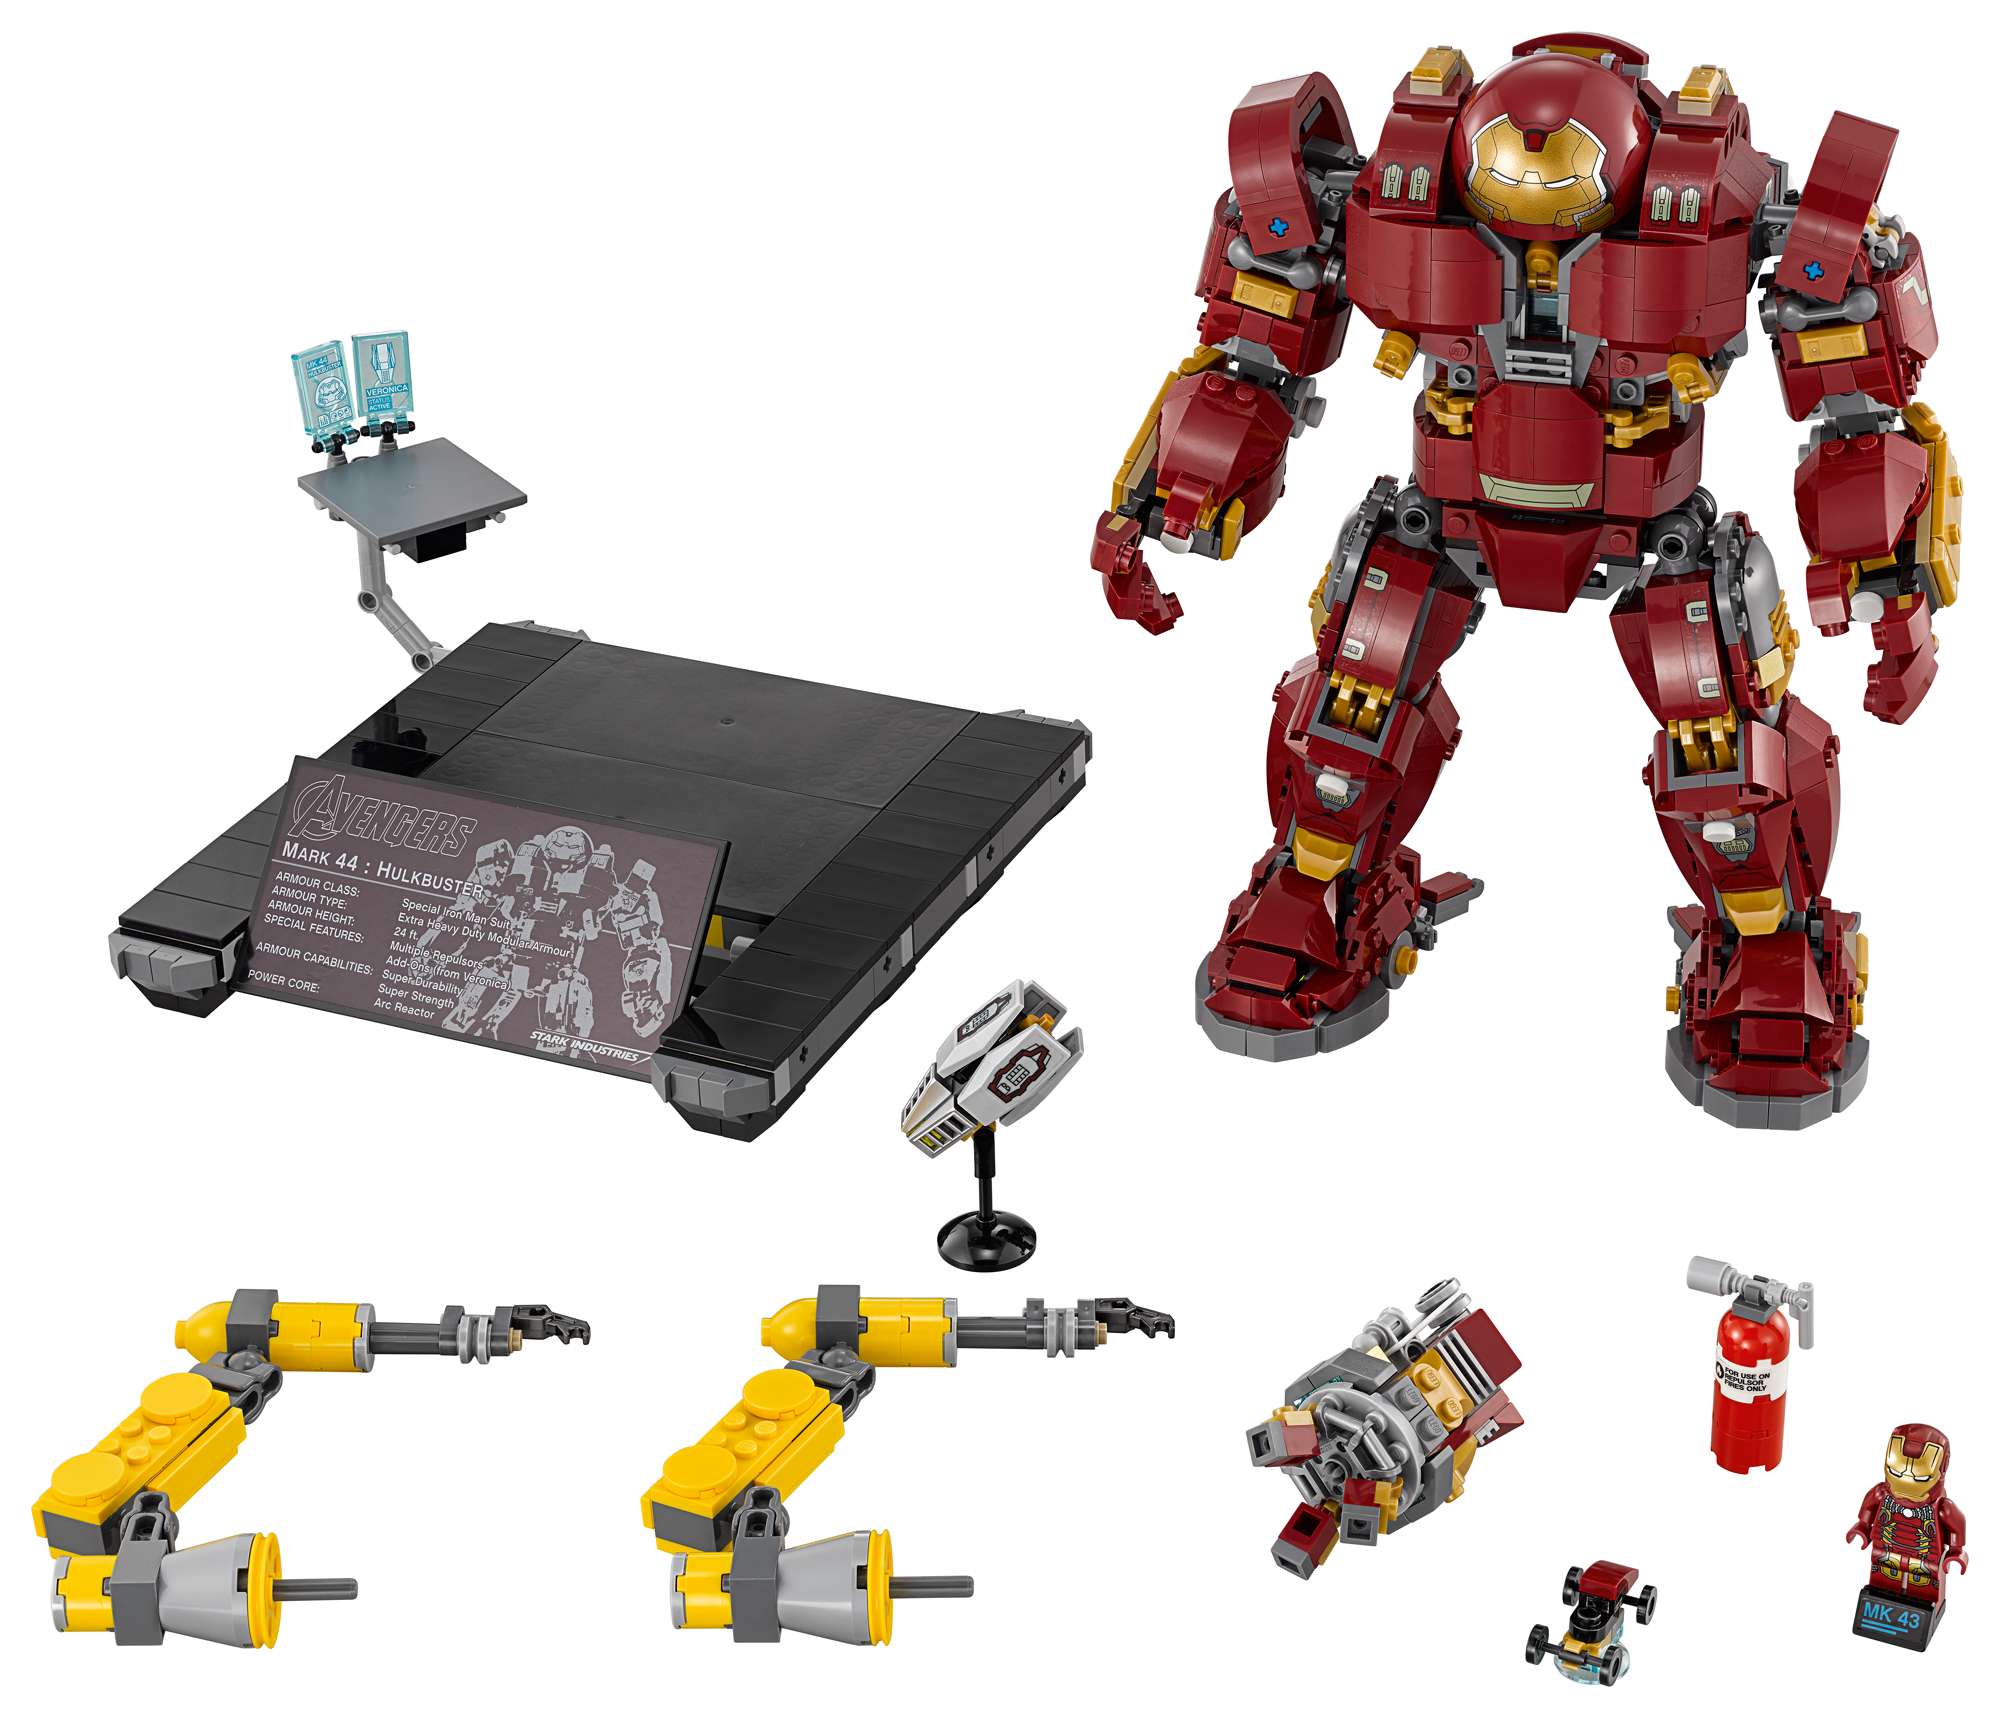 Iron Man’s Hulkbuster Suit Is Getting The Giant Lego Set It Deserves